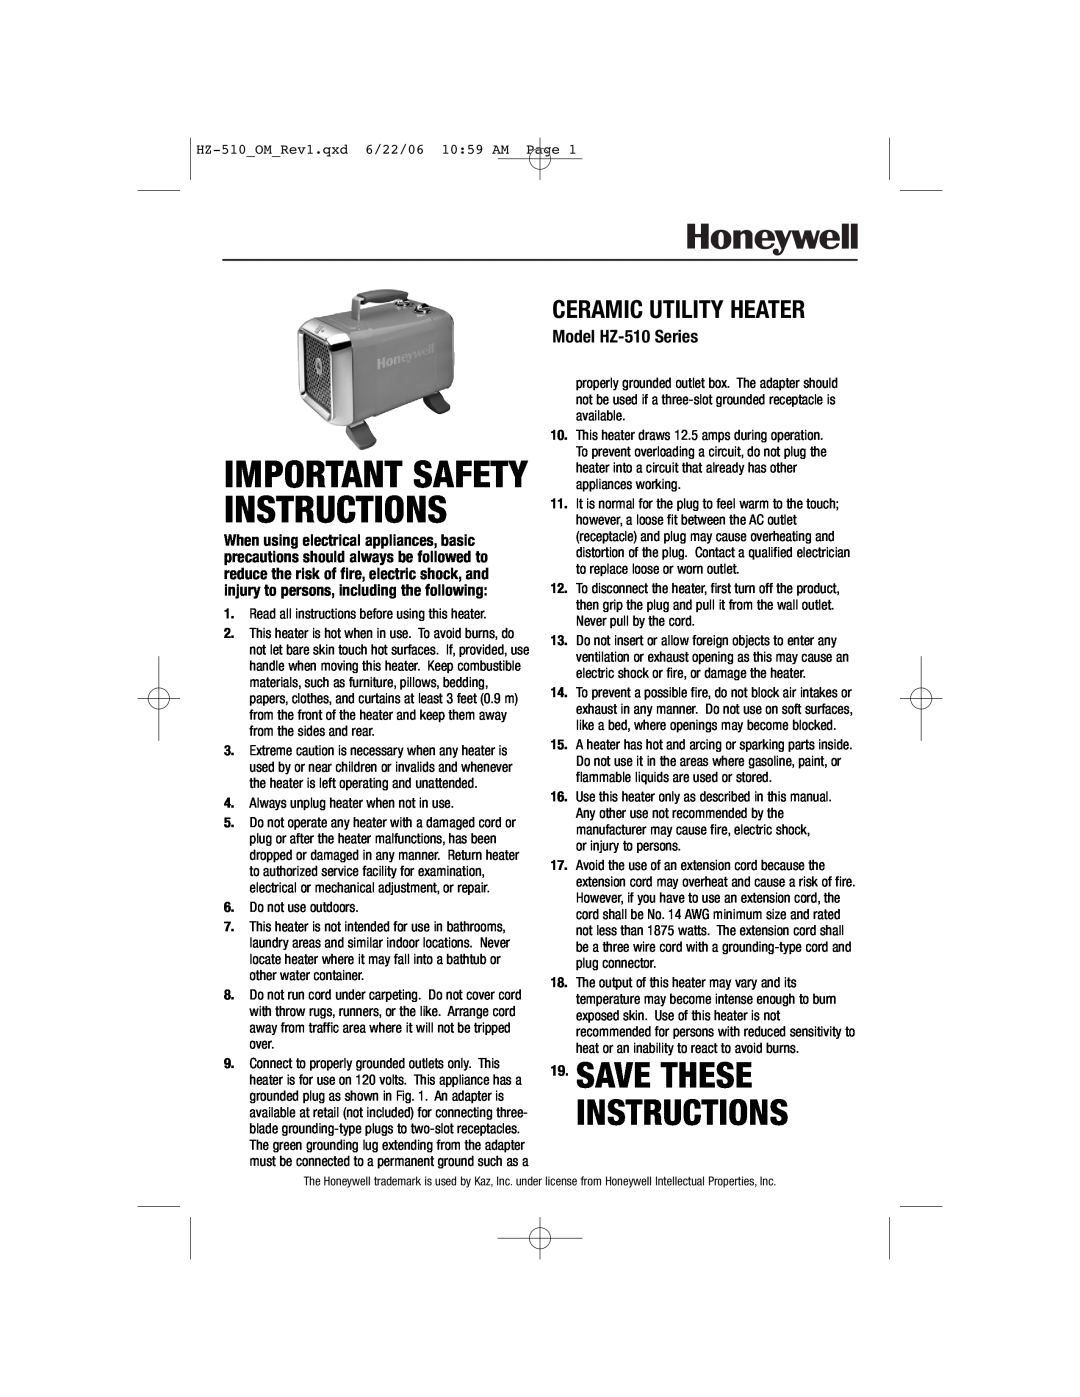 Honeywell important safety instructions Save These Instructions, Model HZ-510Series, Important Safety Instructions 